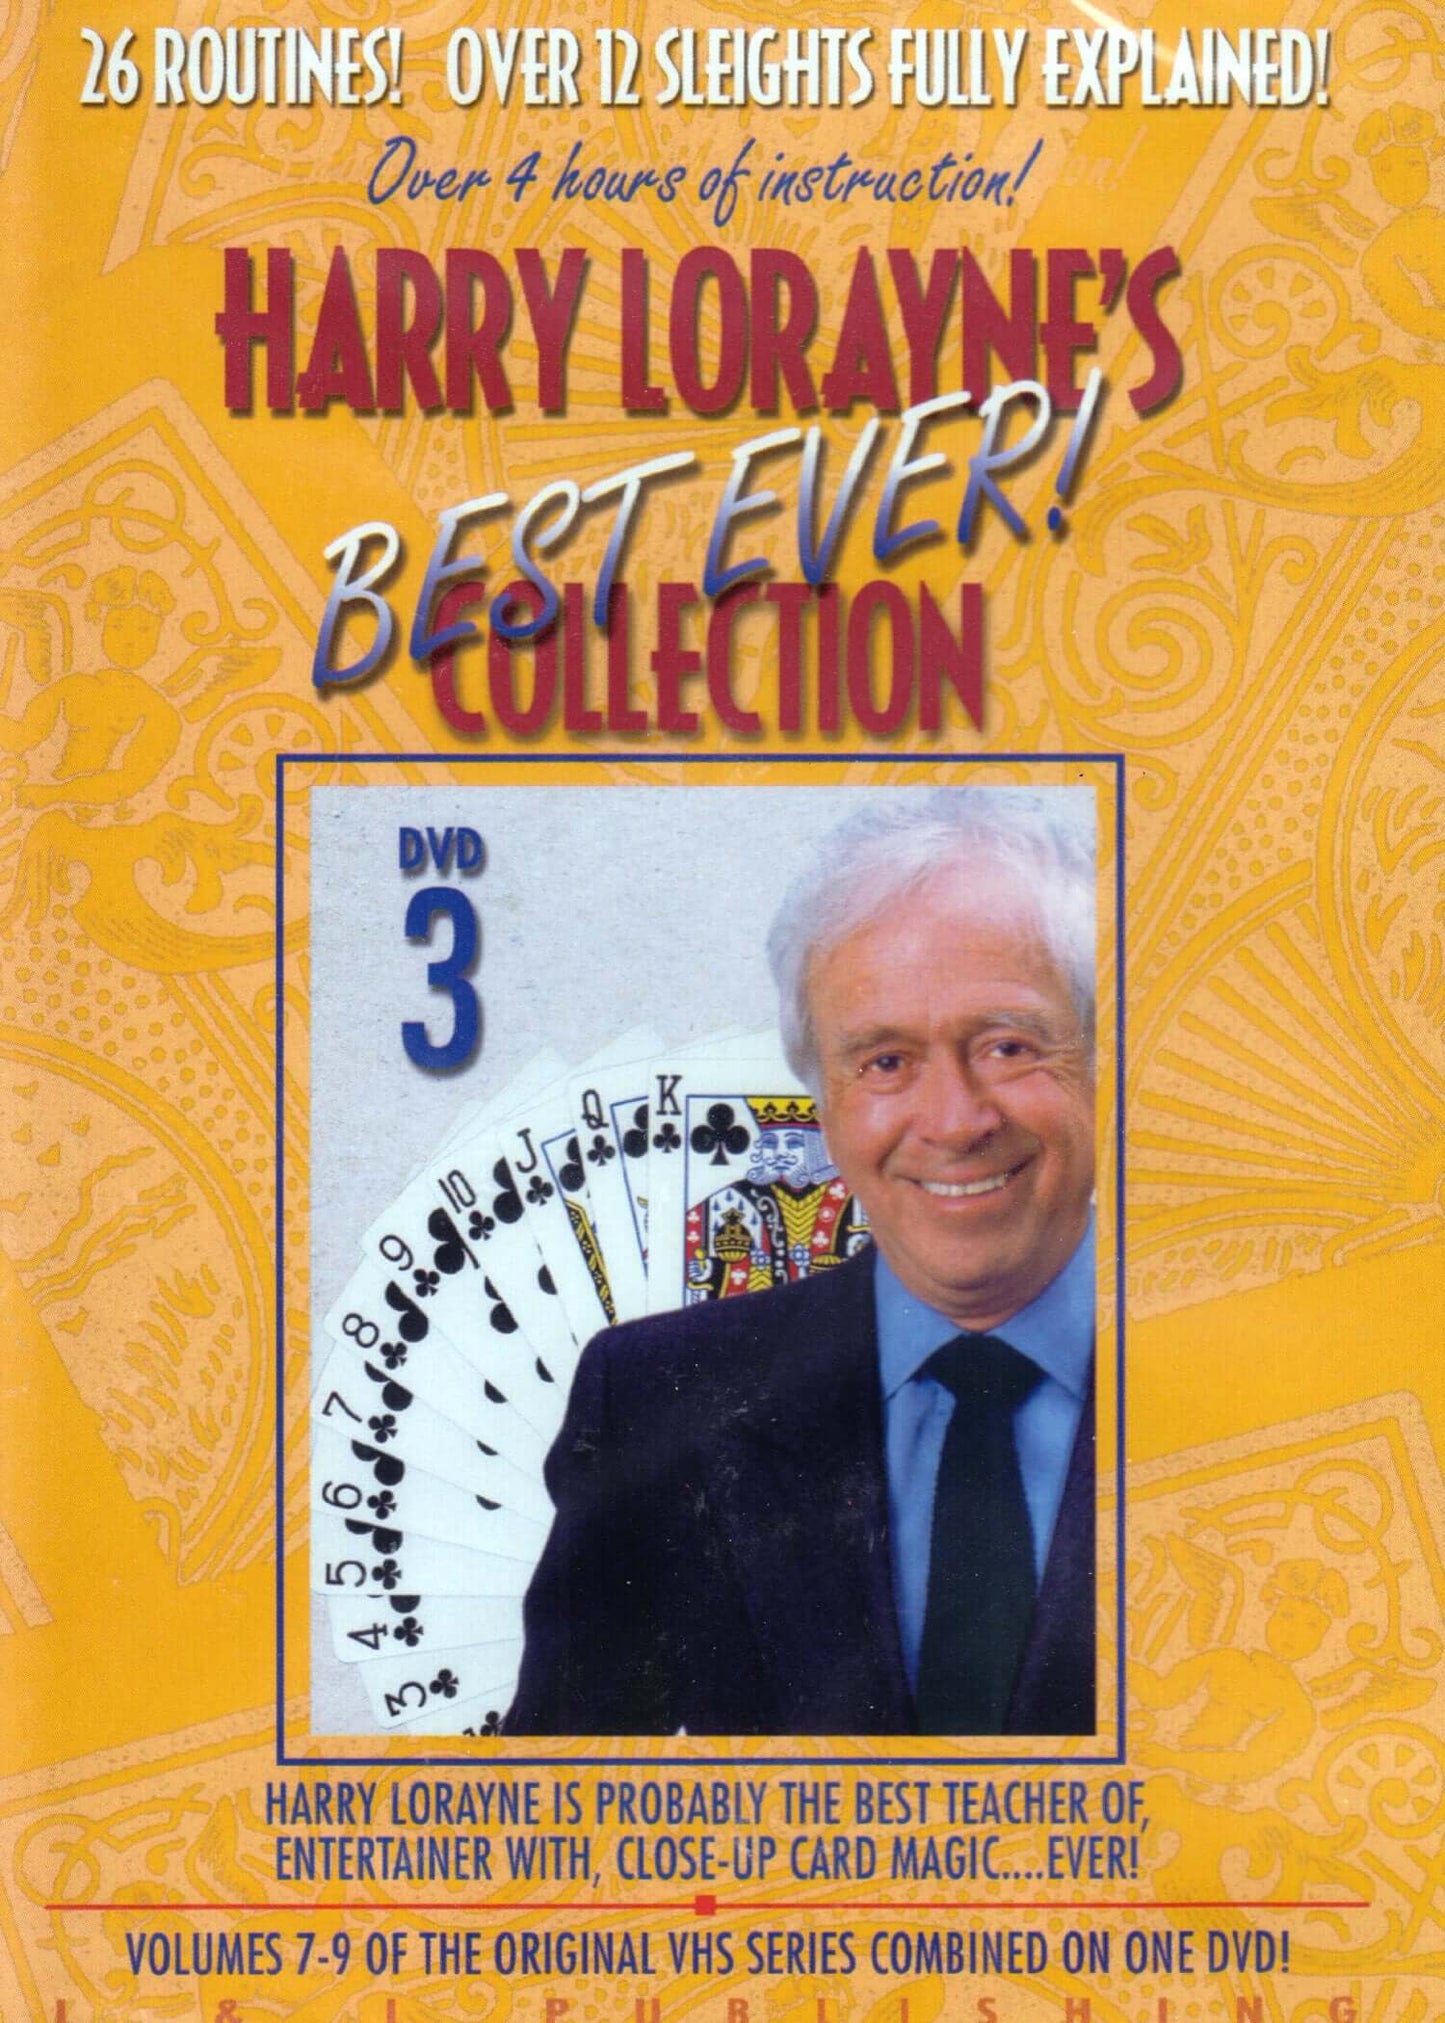 Harry Lorayne’s Best Ever Collection, DVD 3